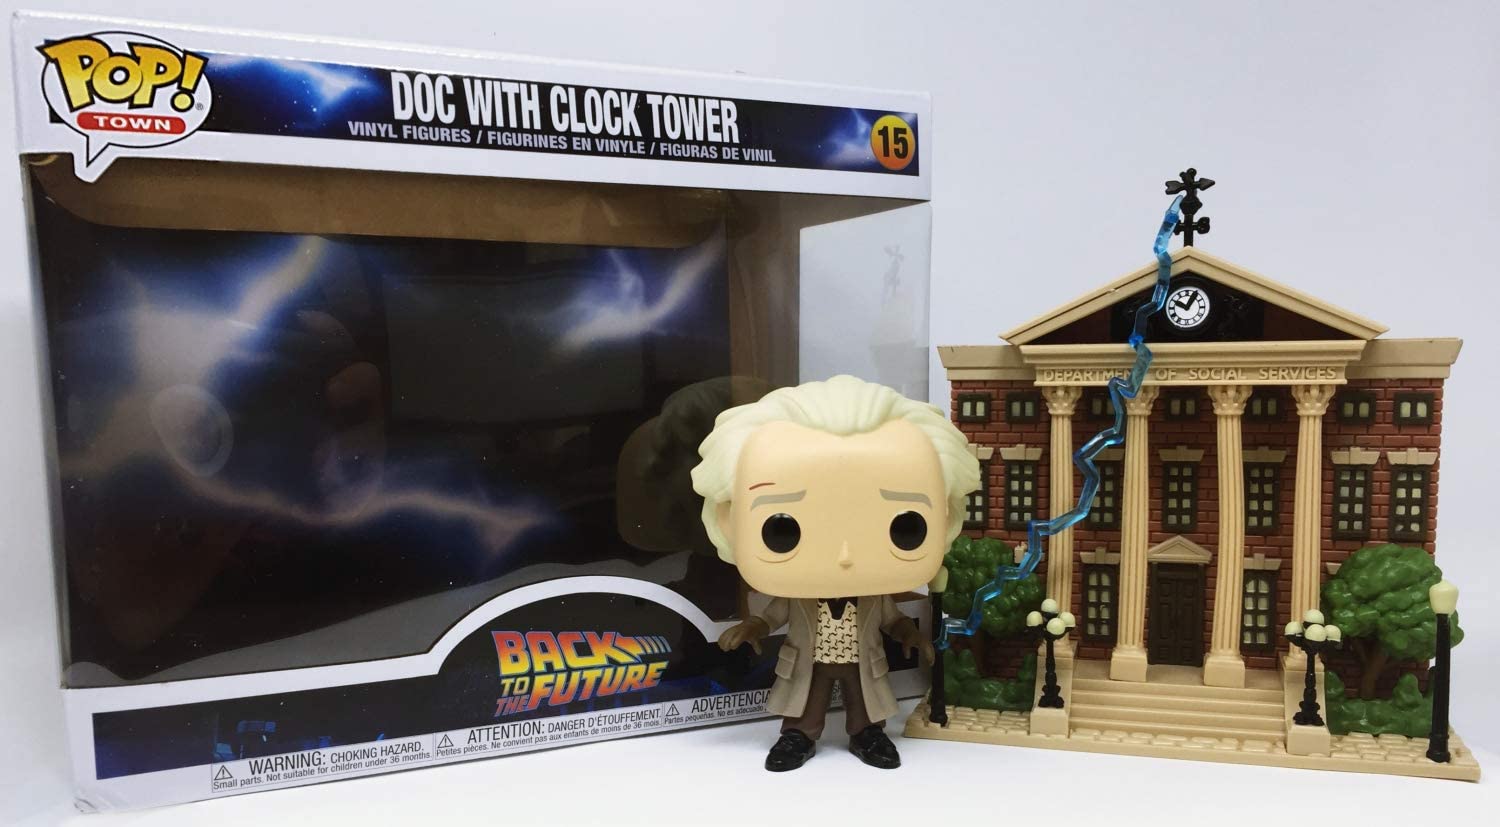 Funko Pop! Back To The Future: Town - Doc With Clock Tower (Vinyl Figure 15)